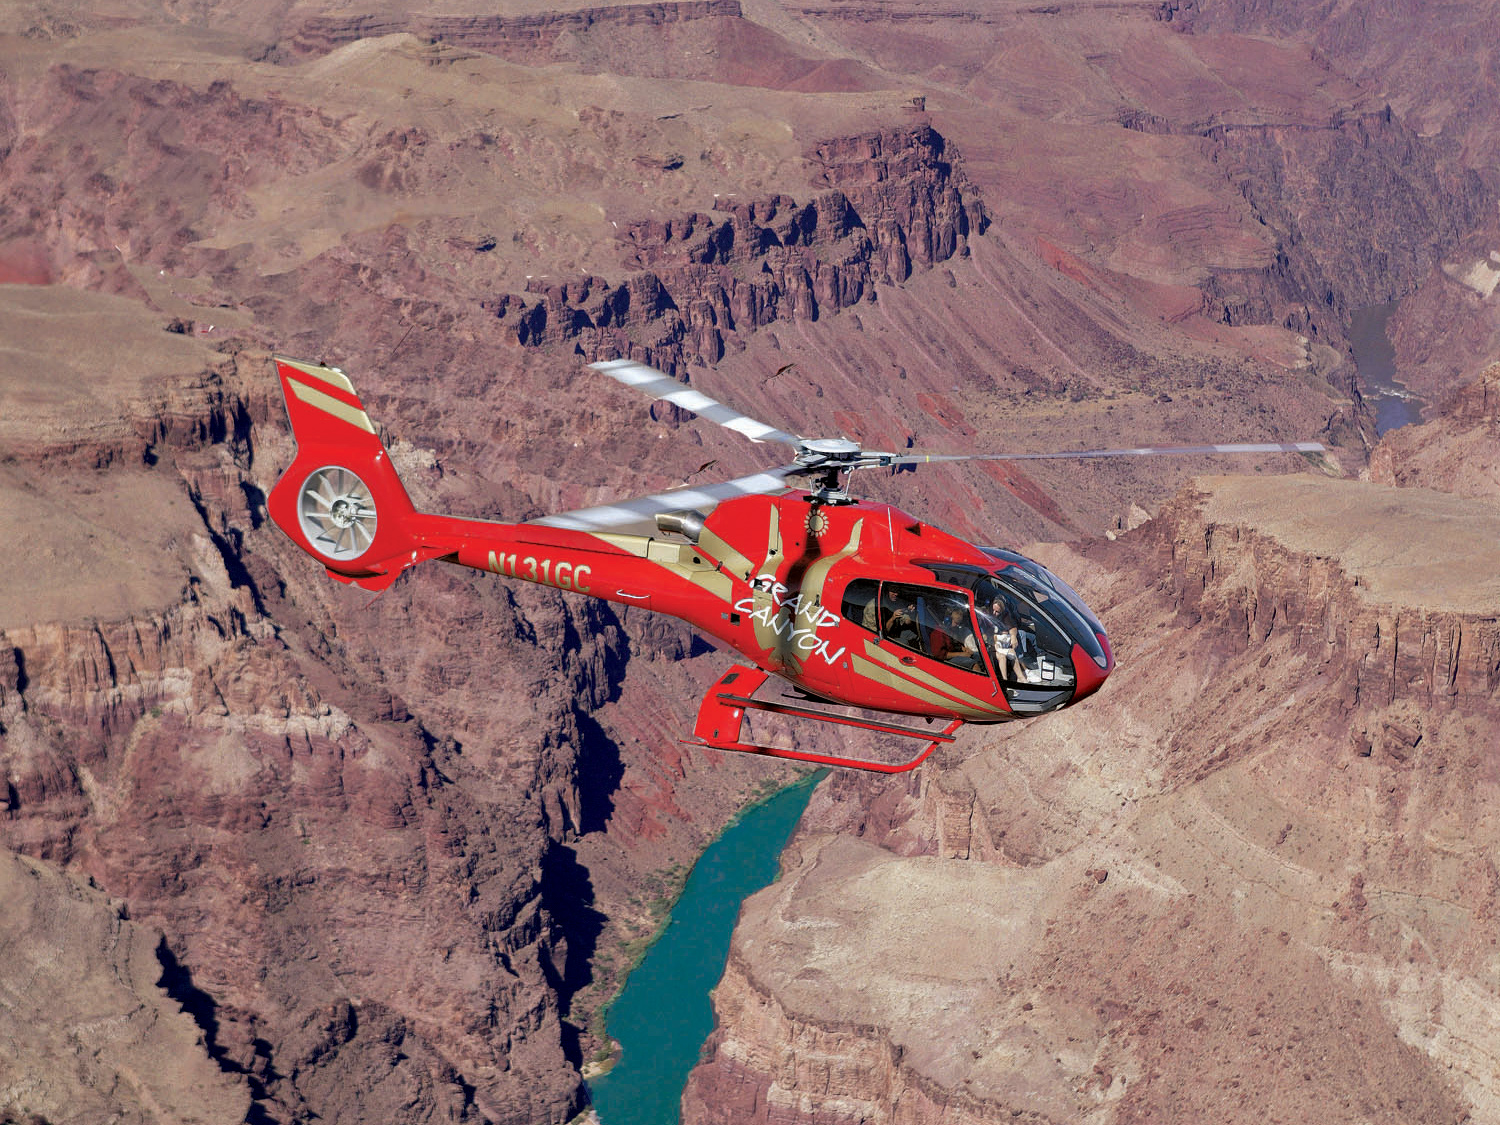 helicopter tour grand canyon south rim from las vegas